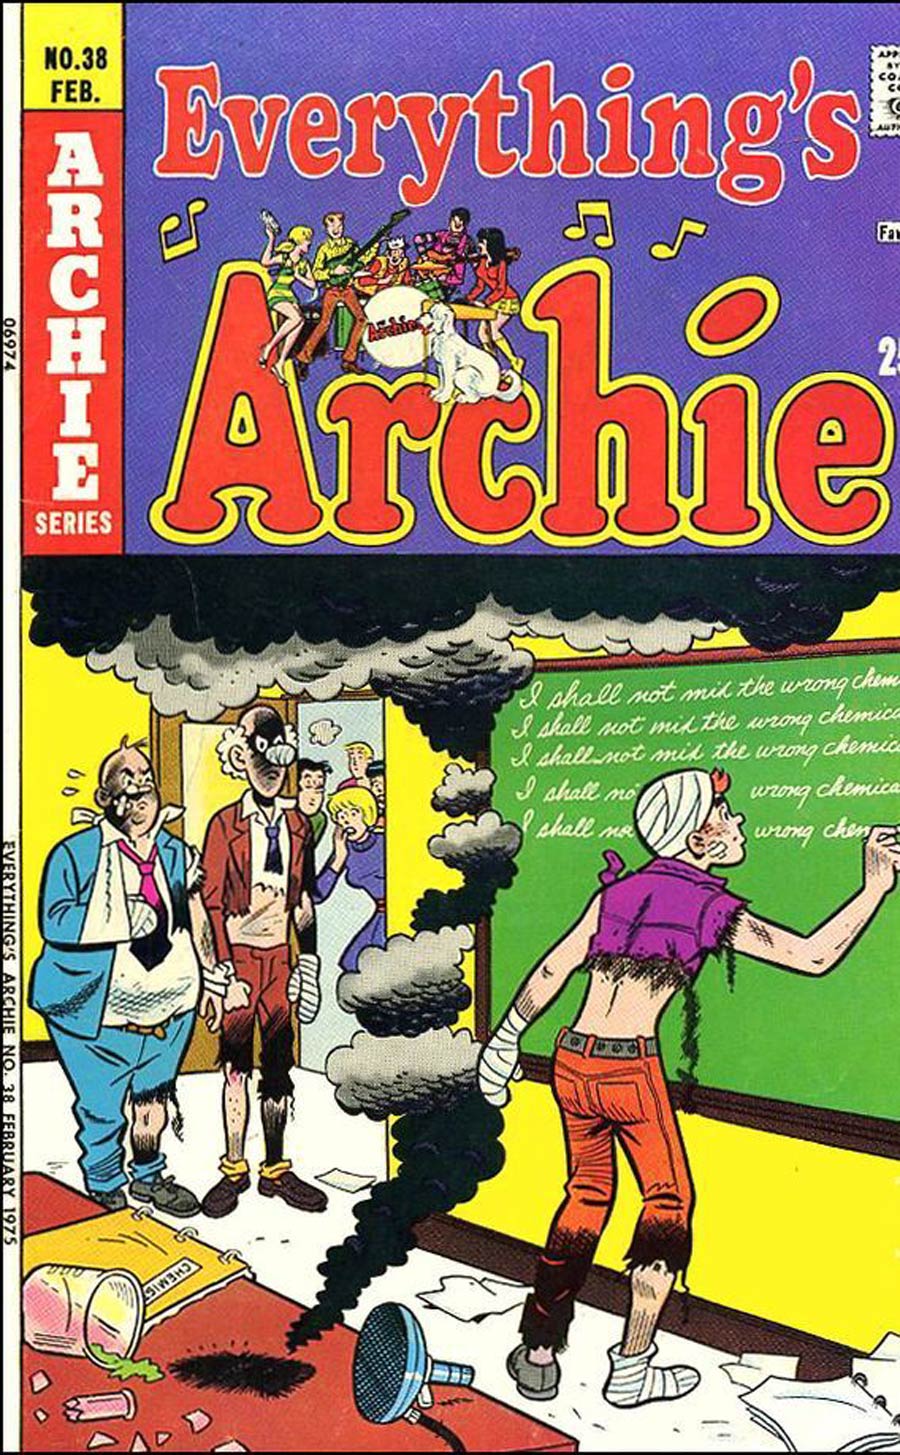 Everythings Archie #38